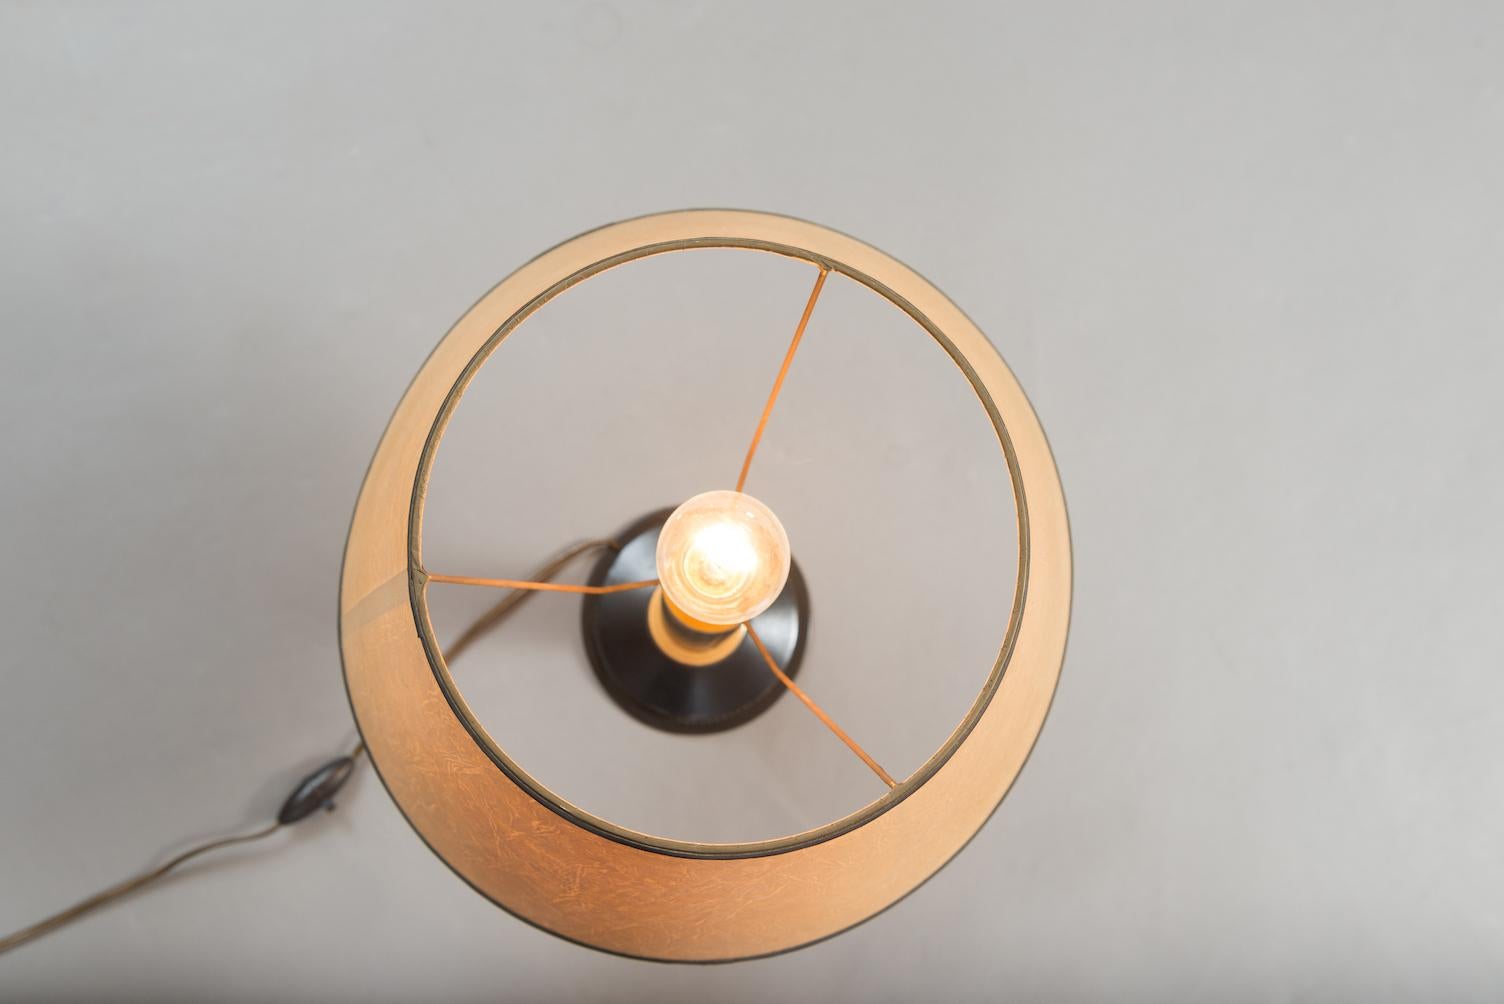 French Mid-century modern table lamp in the style of Jacques Adnet